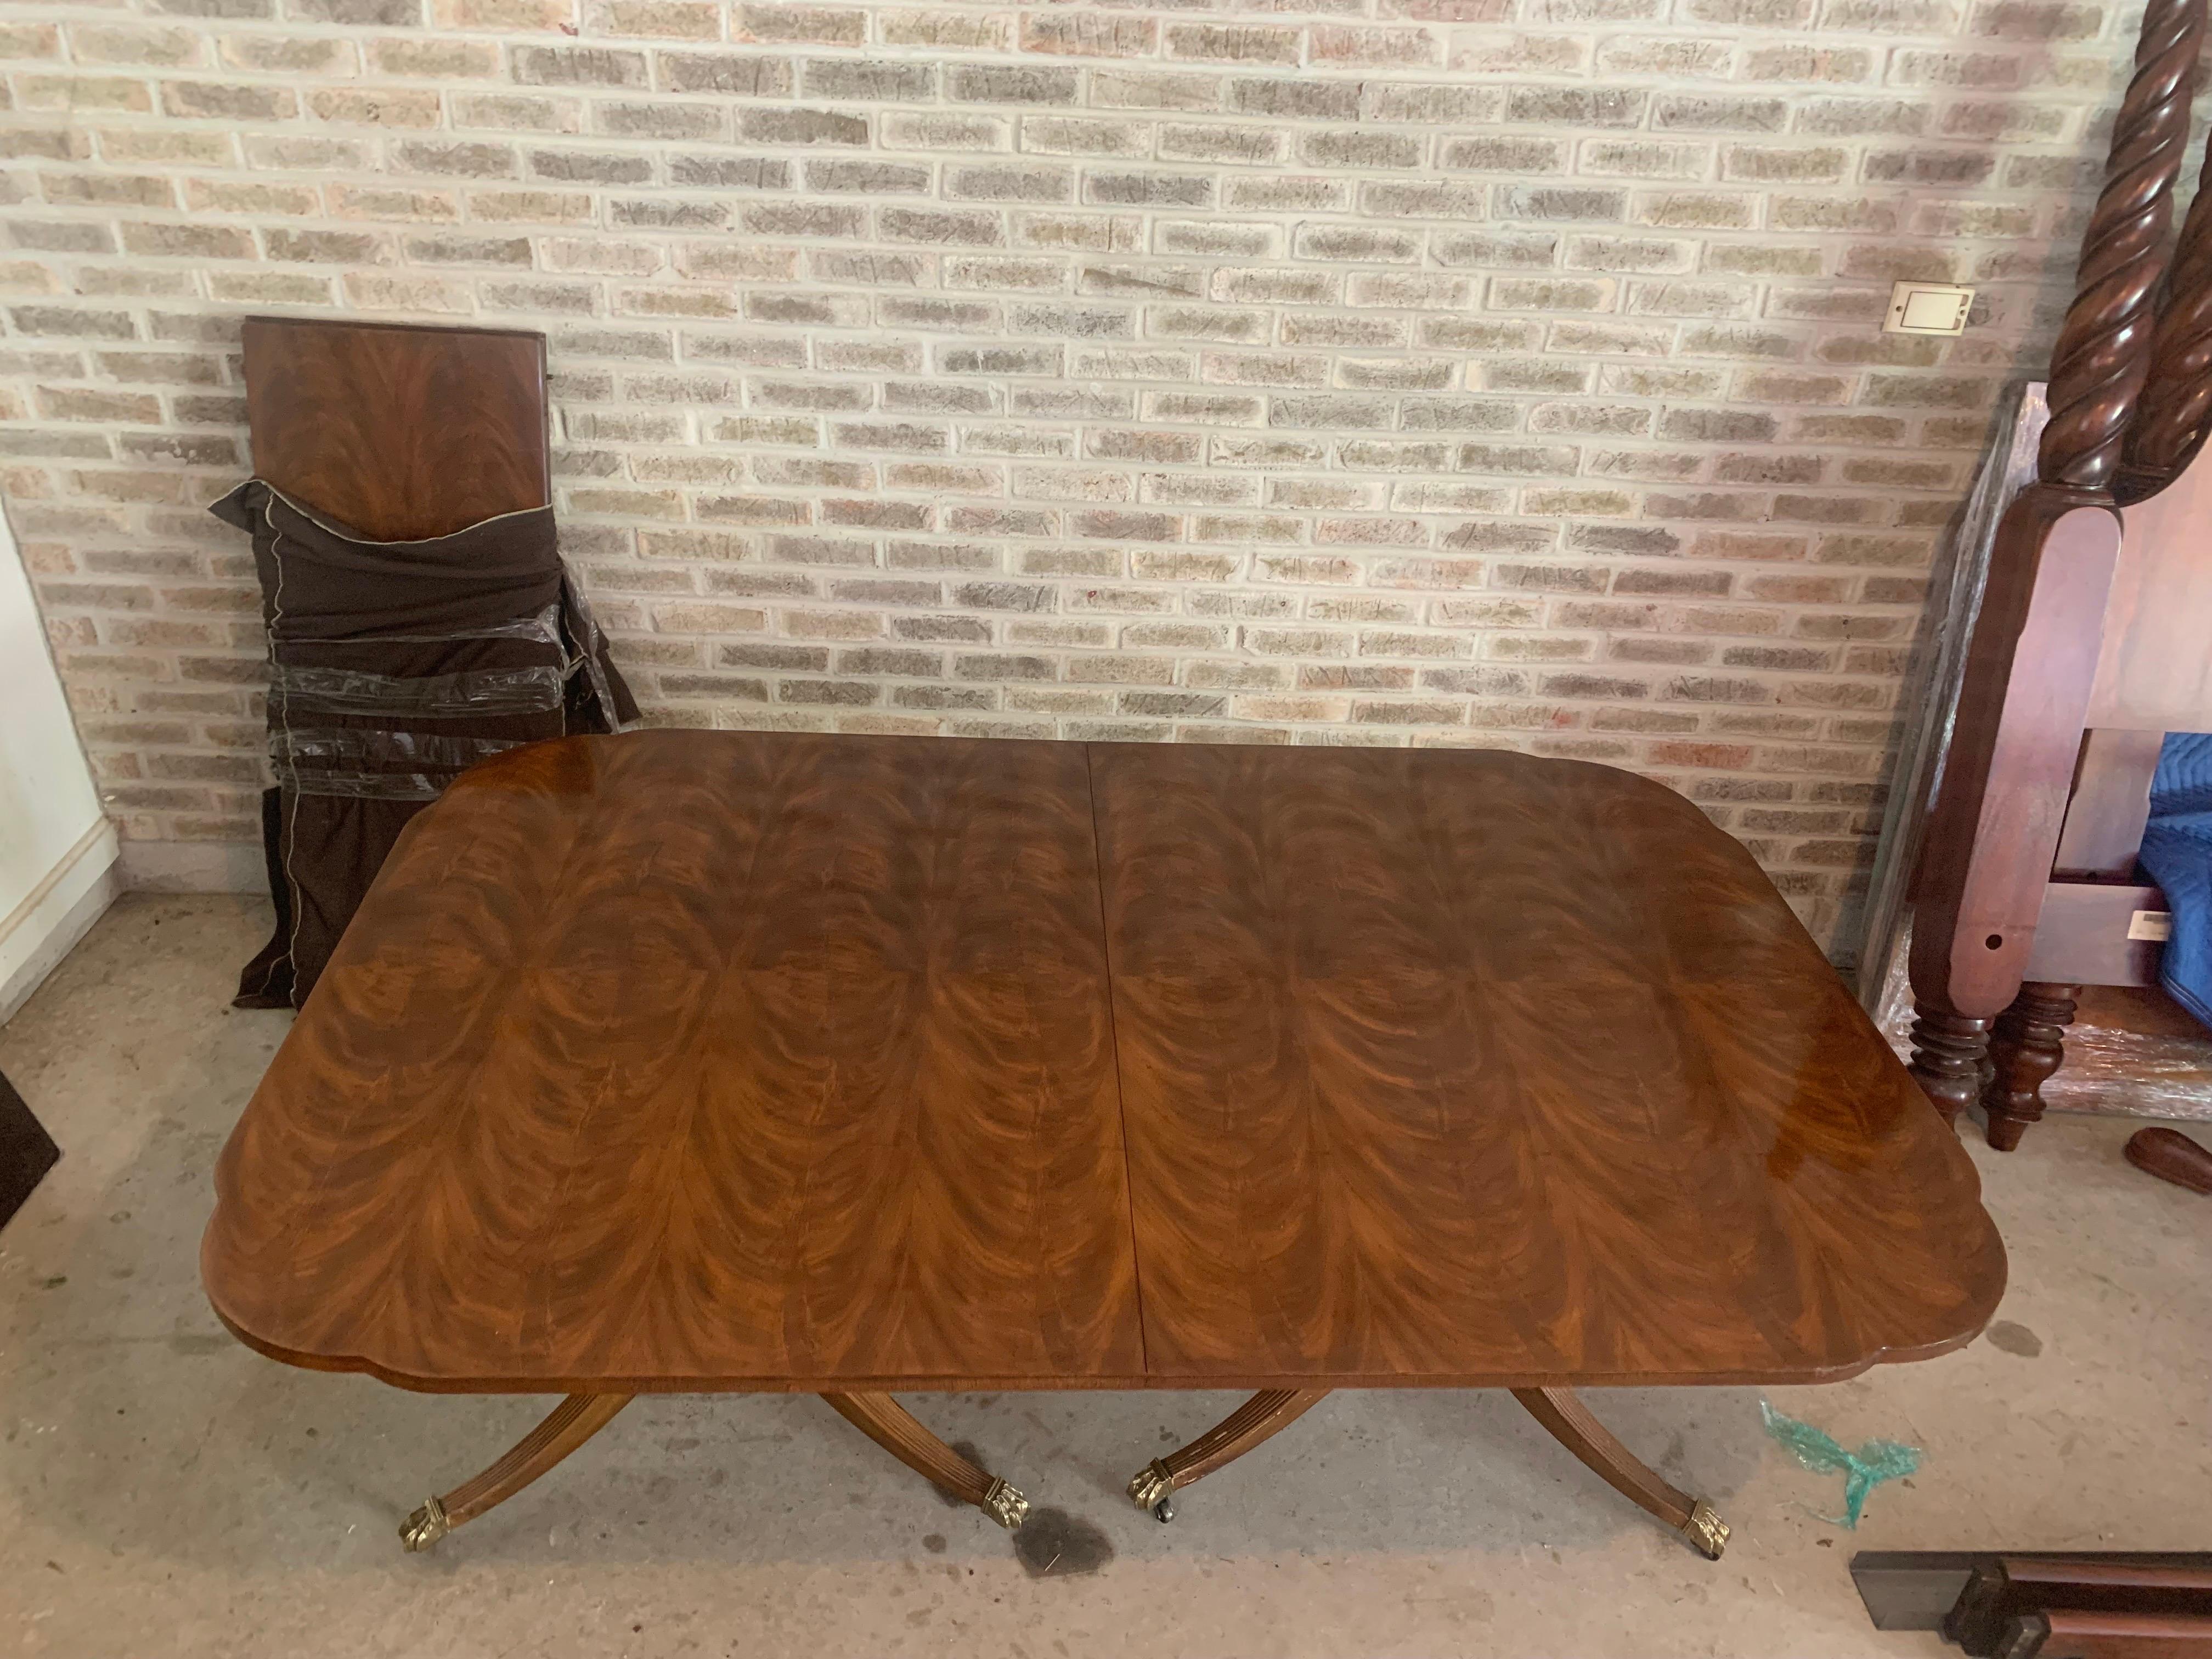 20th Century Drexel Flame Mahogany Georgian Style Double Pedestal Dining Table